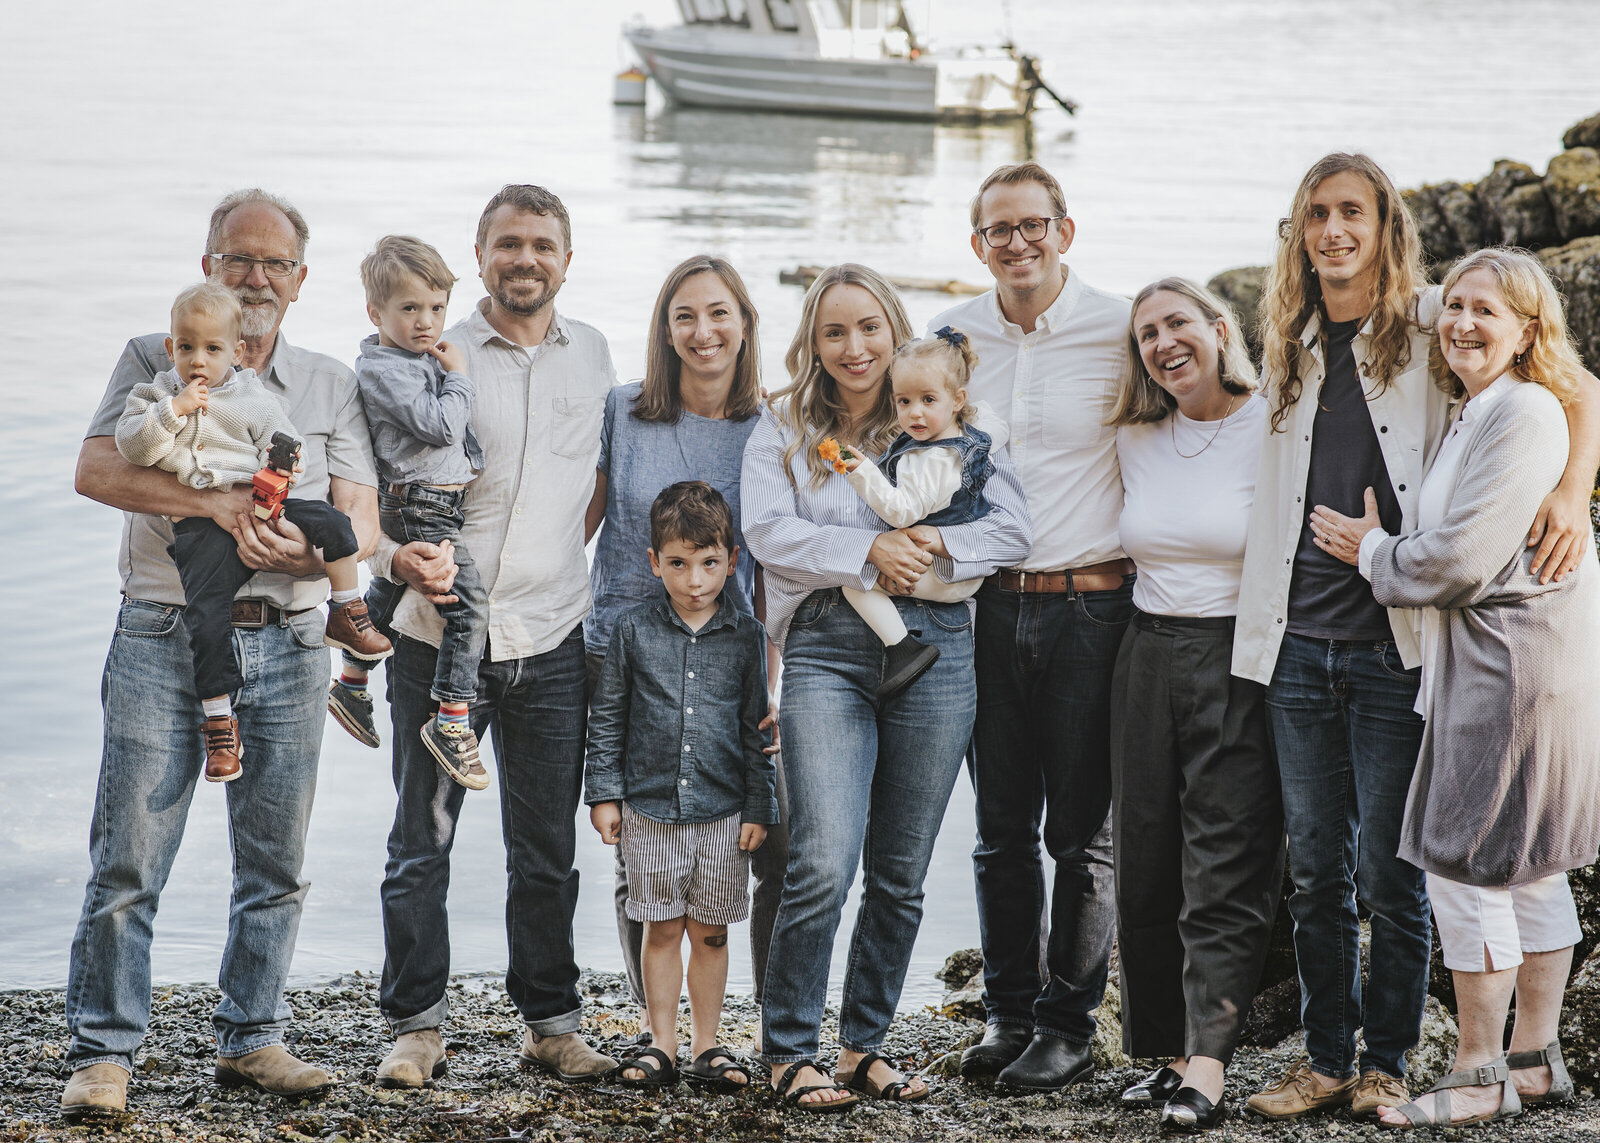 Family of 12 with three generations standing by the shore